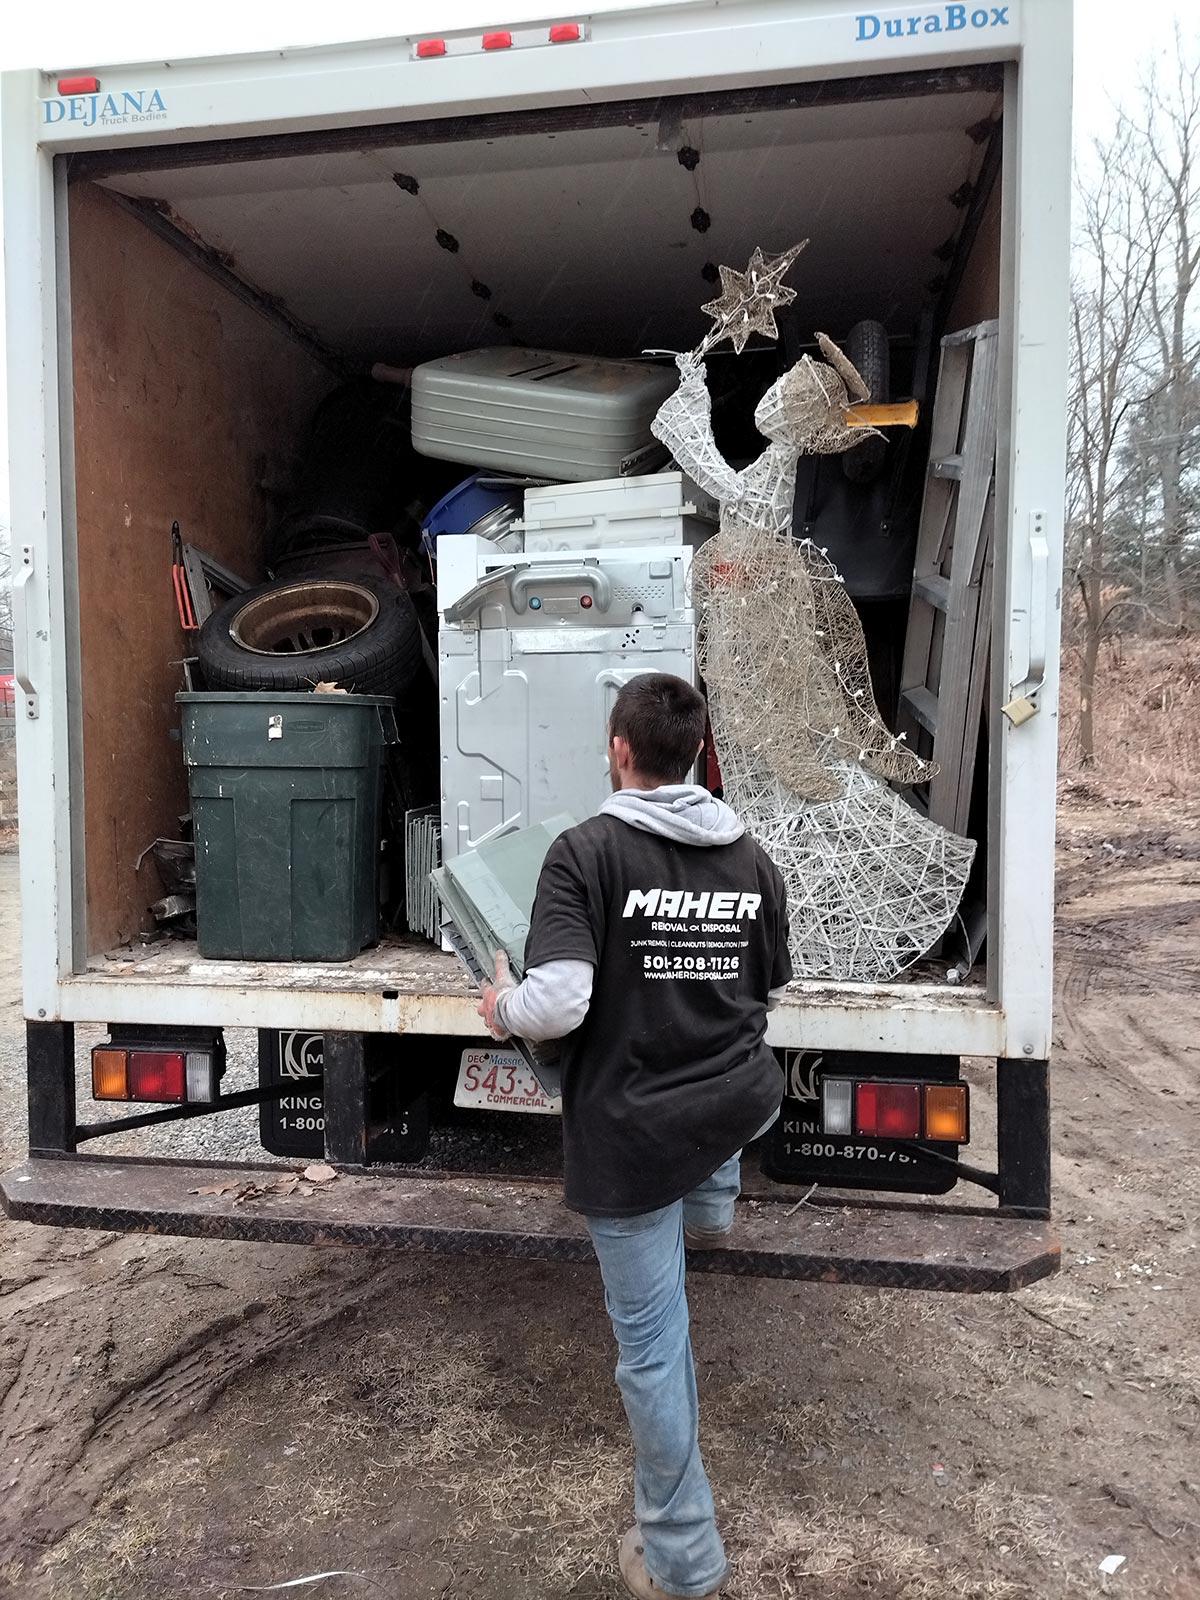 Maher Removal & Disposal is a junk removal company that can help local residents.